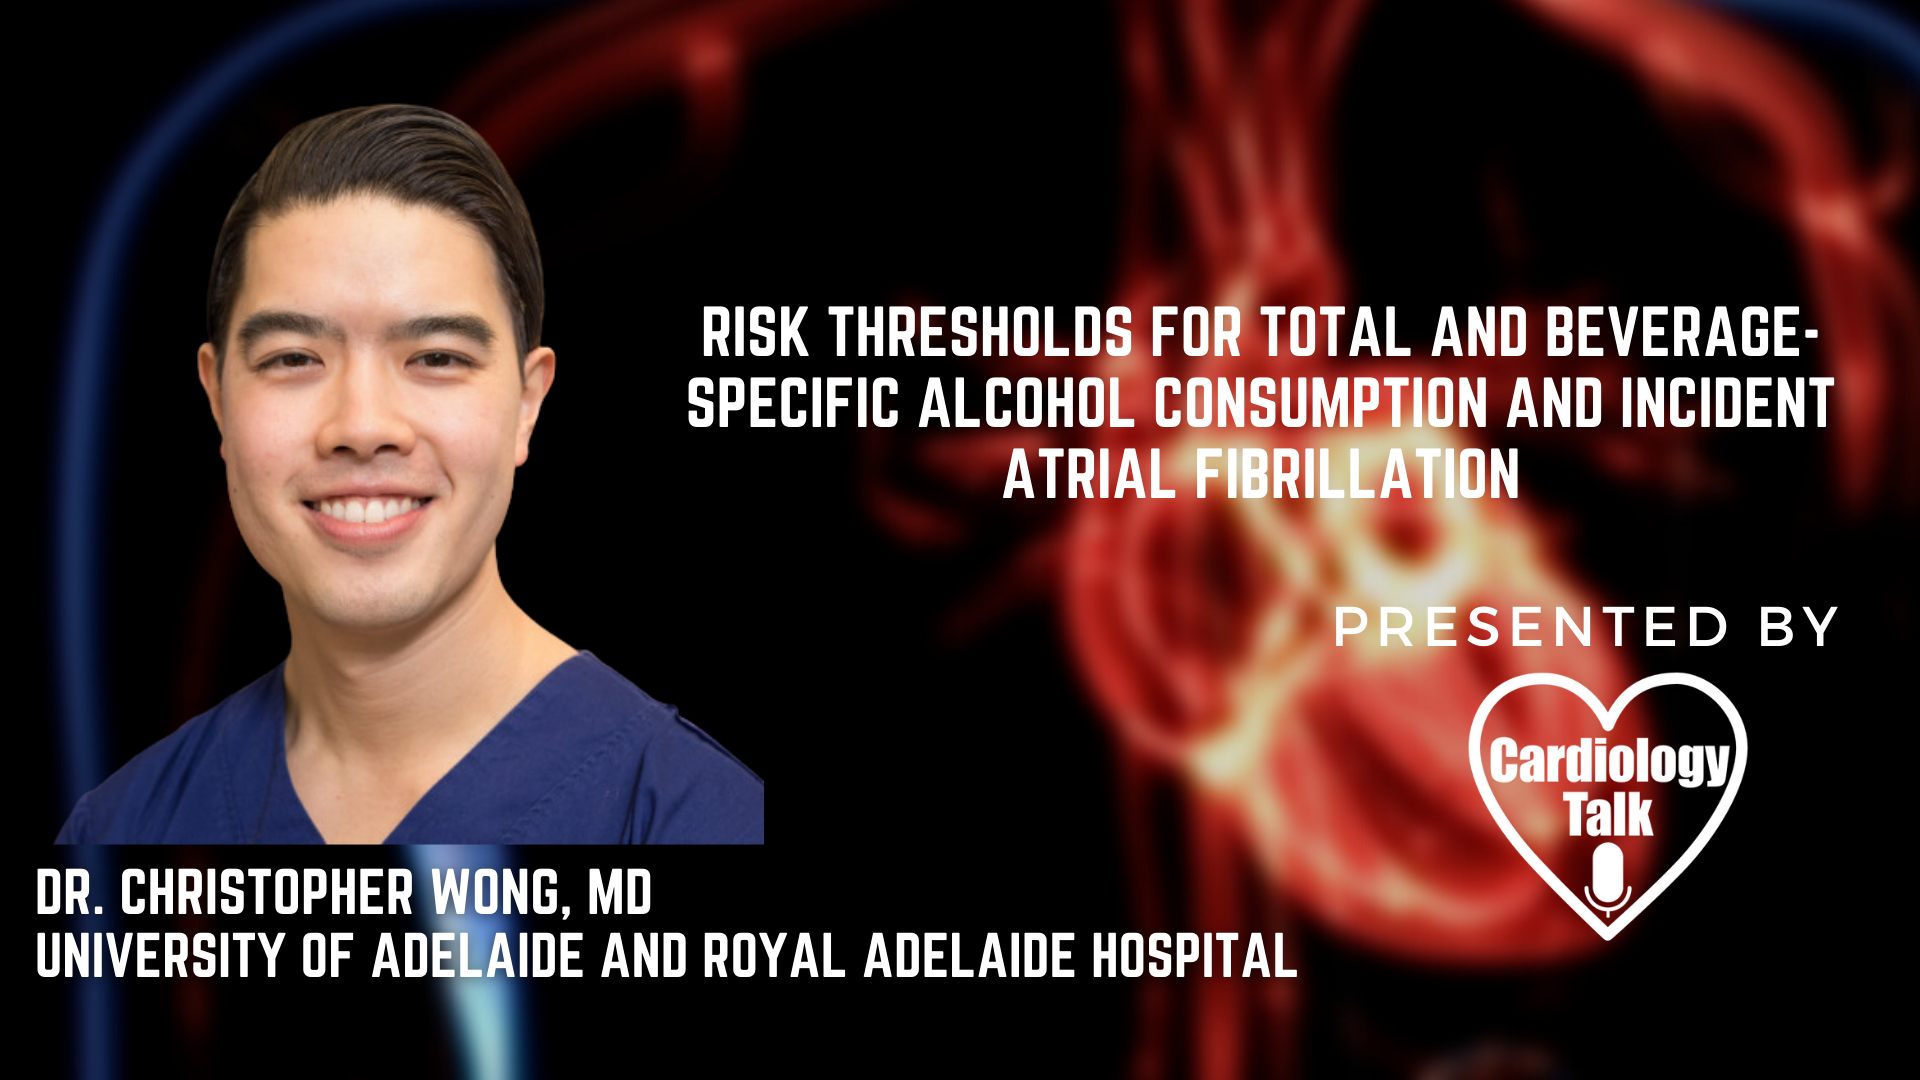 Dr. Christopher Wong, MD- Risk Thresholds for Total and Beverage-Specific Alcohol Consumption and Incident Atrial Fibrillation